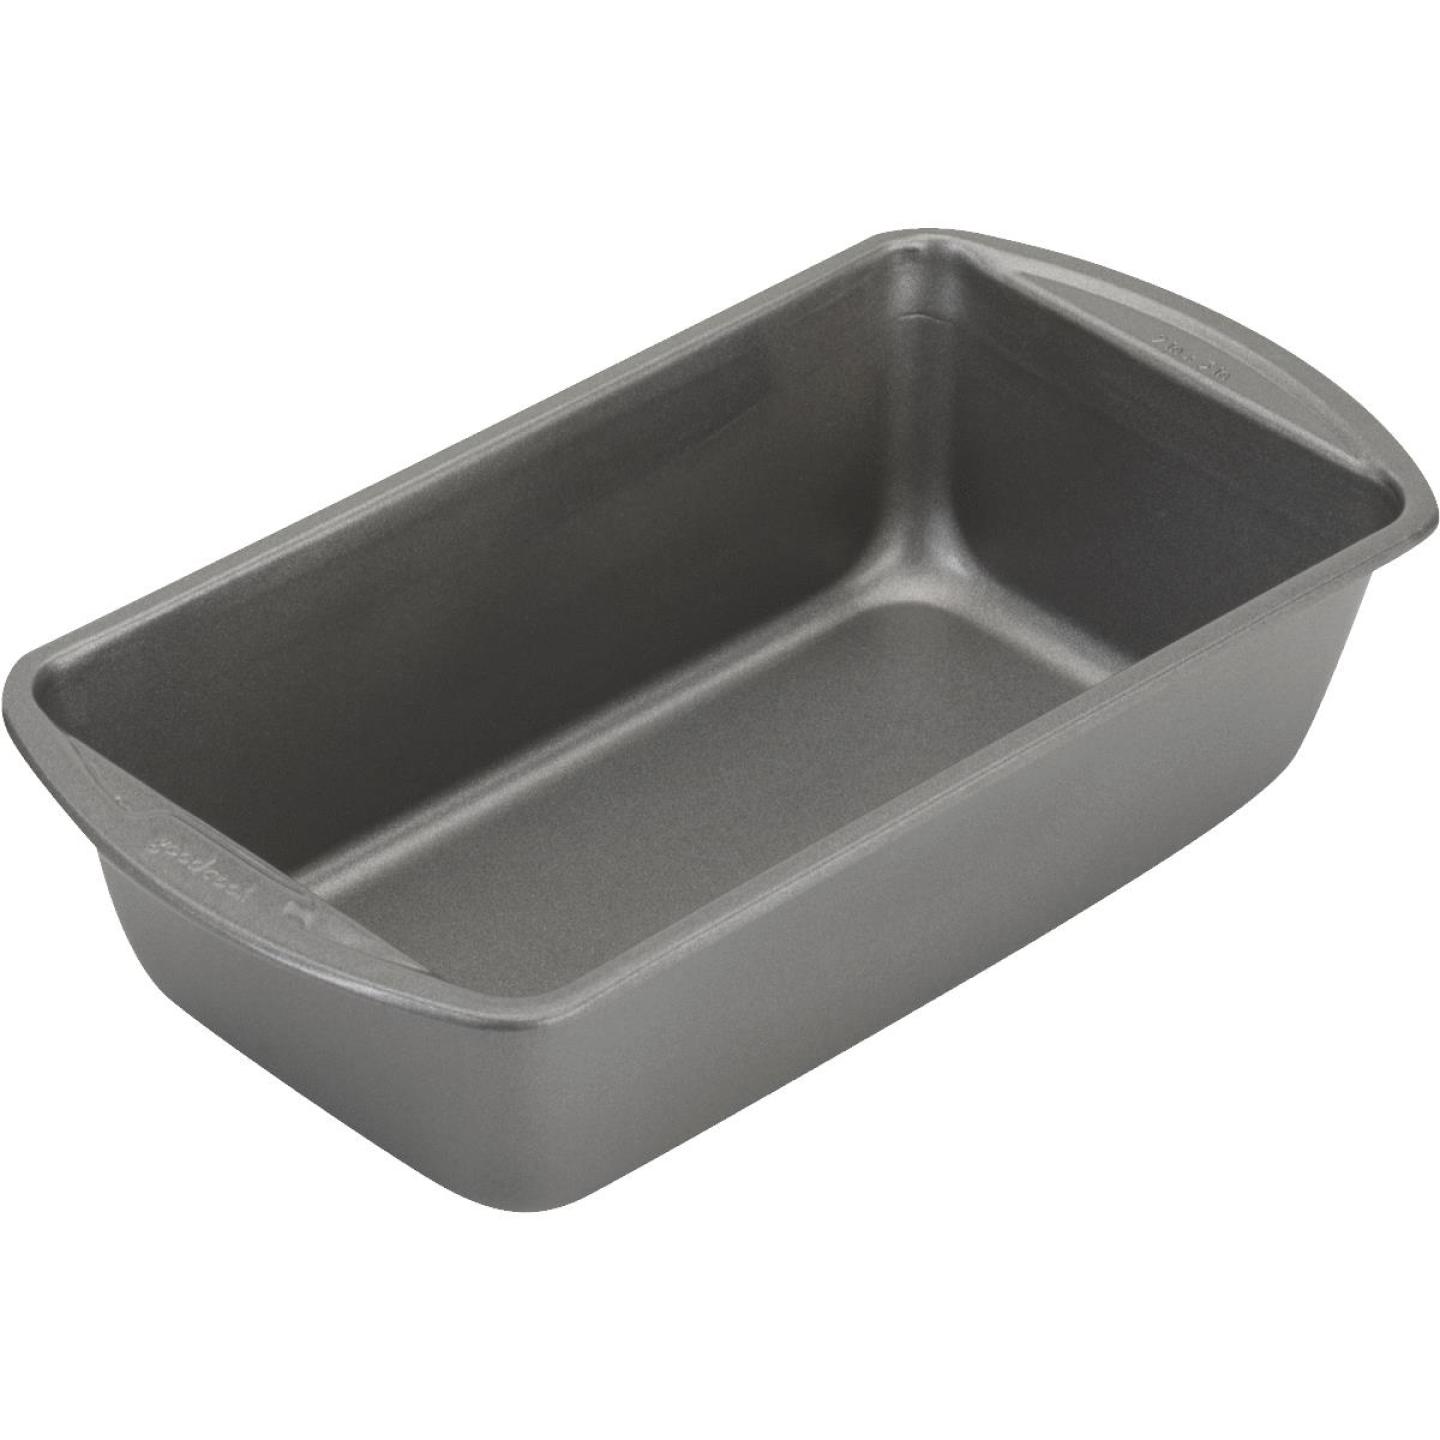 GoodCook 9 In. x 5 In. Non-Stick Loaf Pan